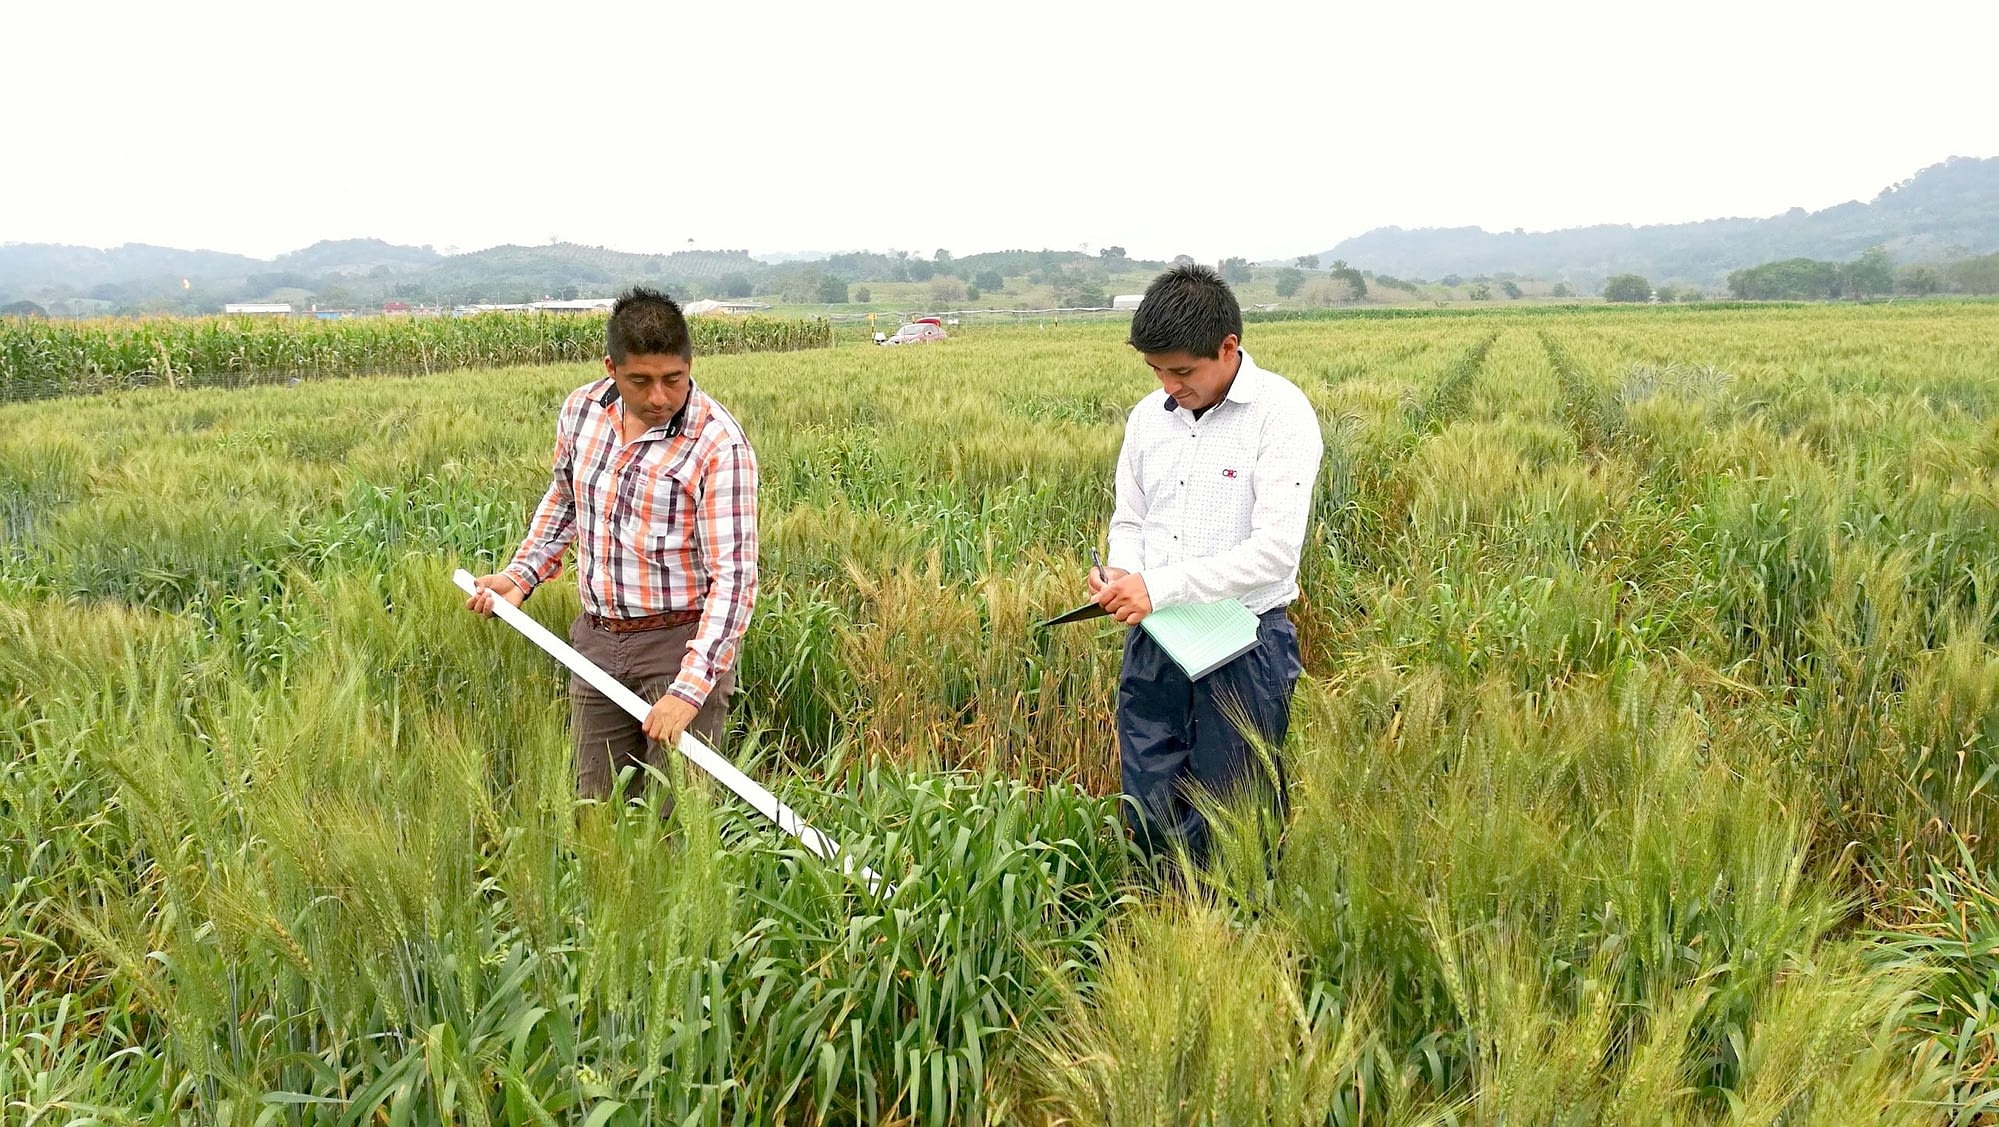 Researchers evaluate wheat for spot blotch at CIMMYT’s experimental station in Agua Fría, Jiutepec, Morelos state, Mexico. (Photo: Xinyao He and Pawan Singh/CIMMYT)